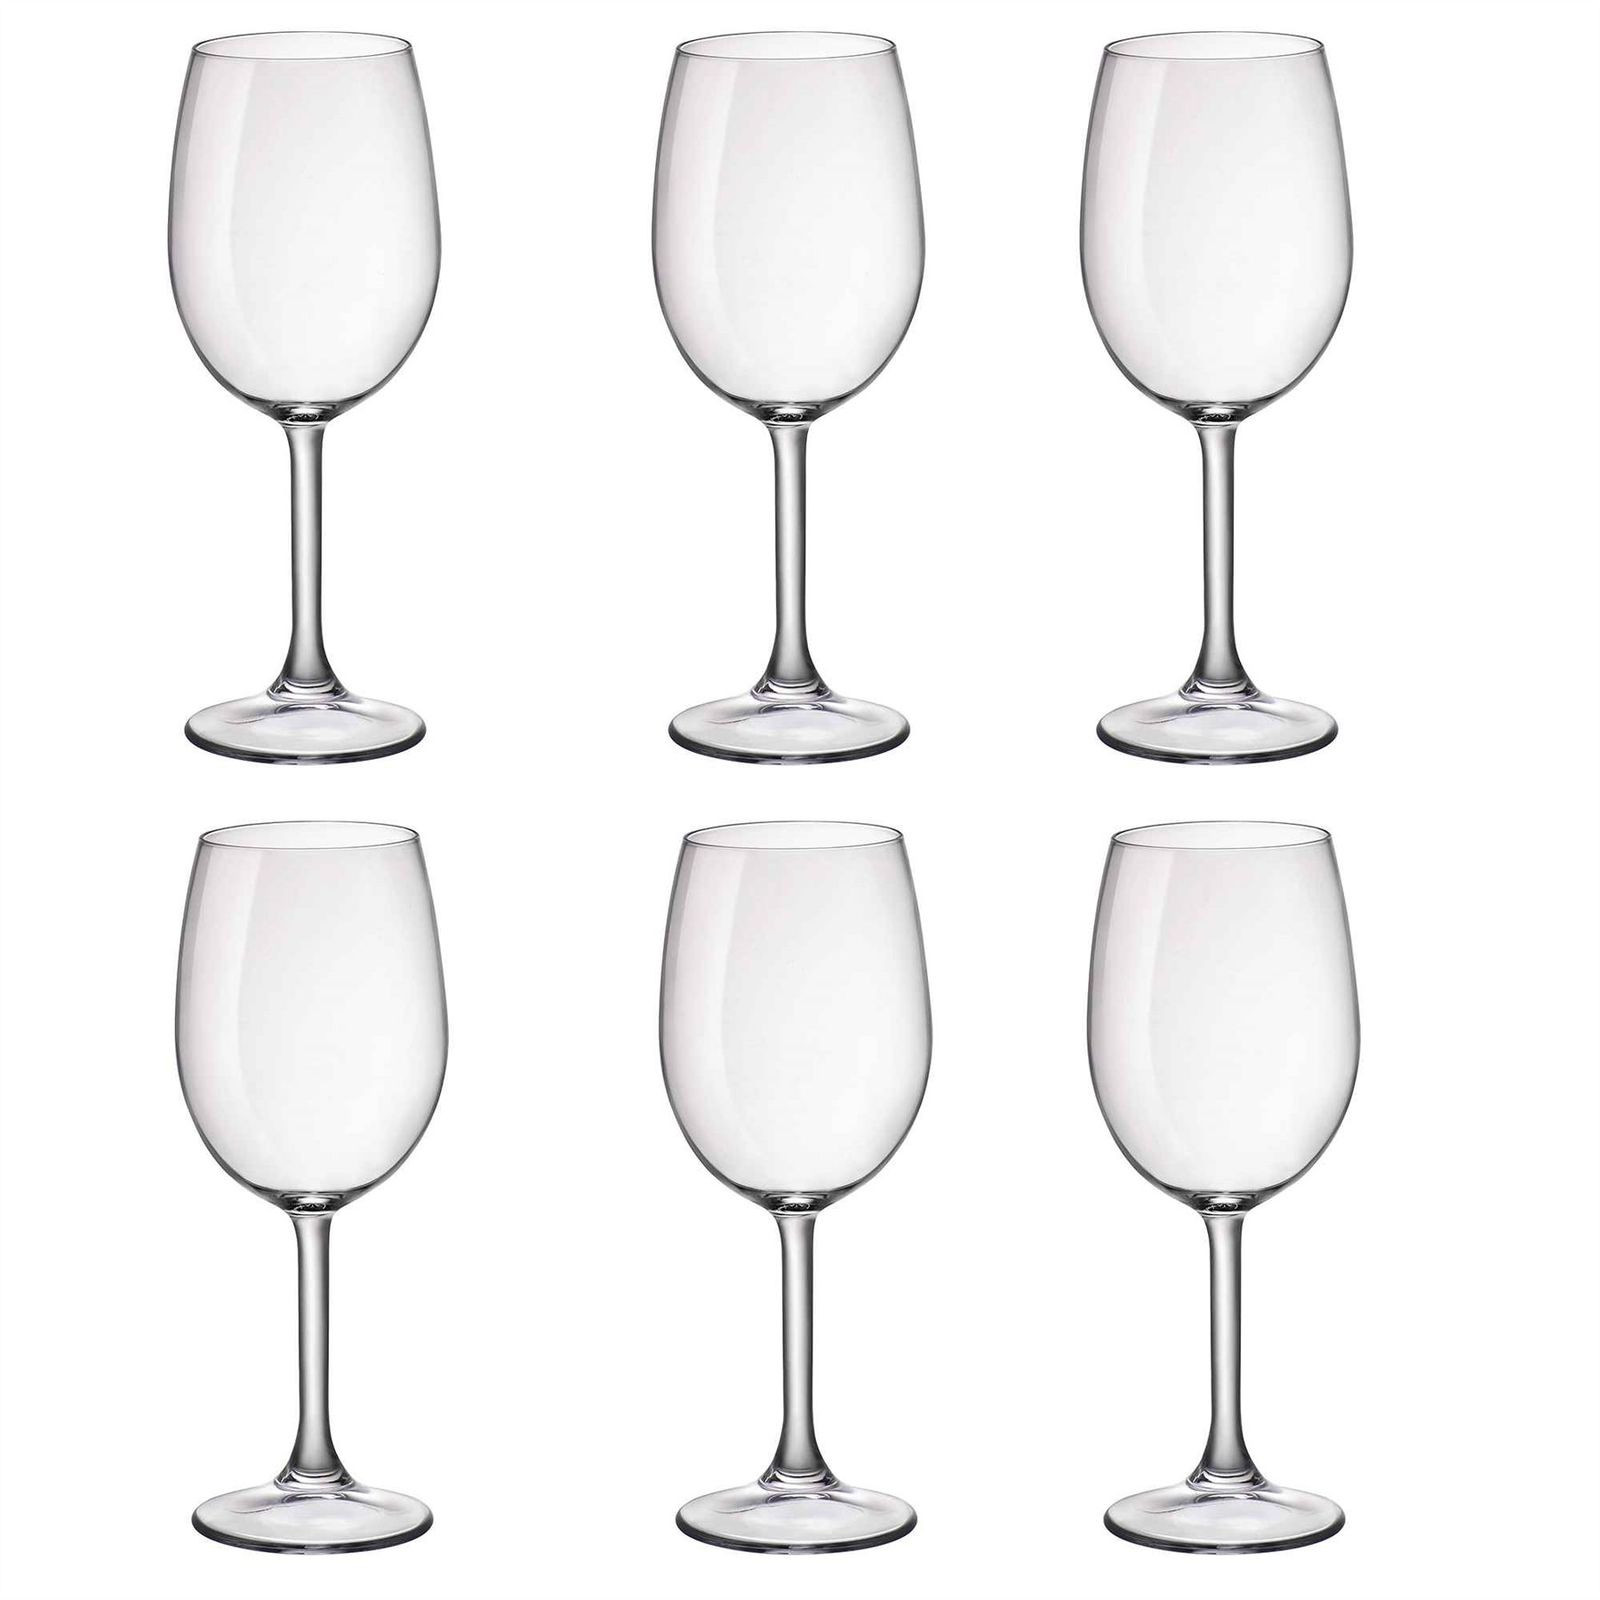 14 Stylish Rcr Crystal Vase 2024 free download rcr crystal vase of duralex amboise white wine glasses 250ml x6 a16 99 picclick uk for 1 of 3free shipping